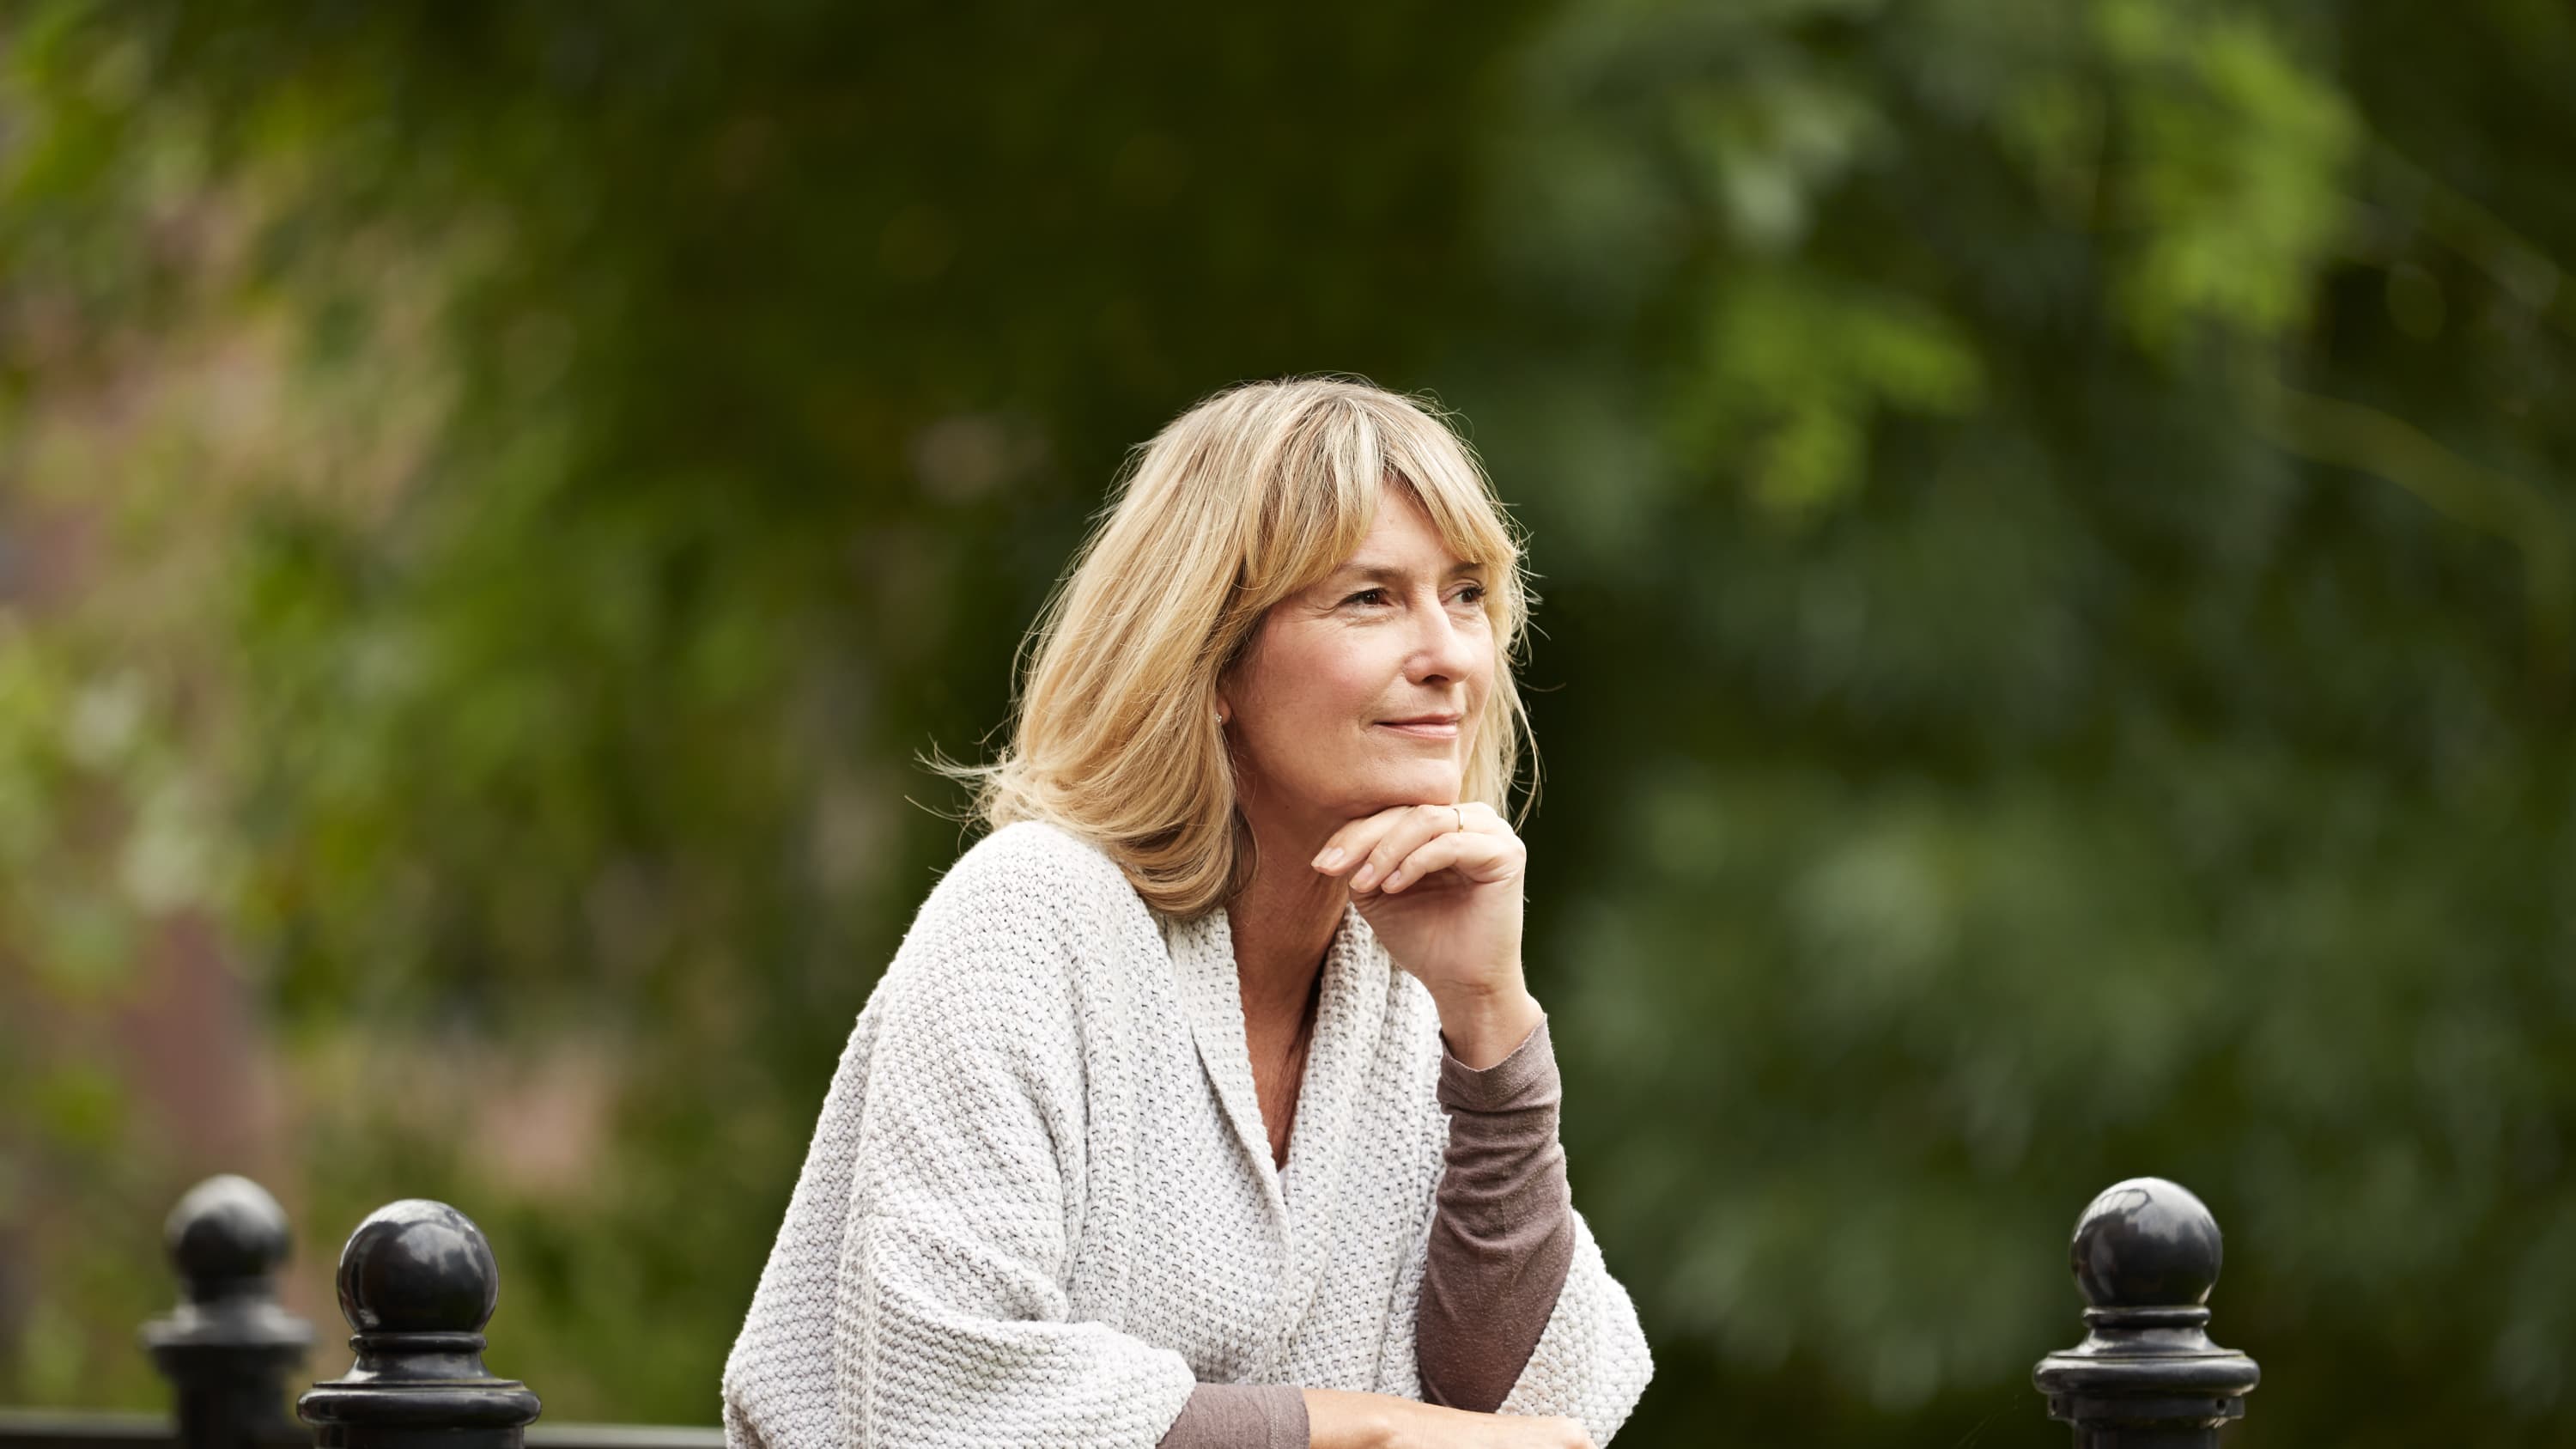 A middle-aged woman gazes out above her balcony, deep in thought, possibly about low bone density